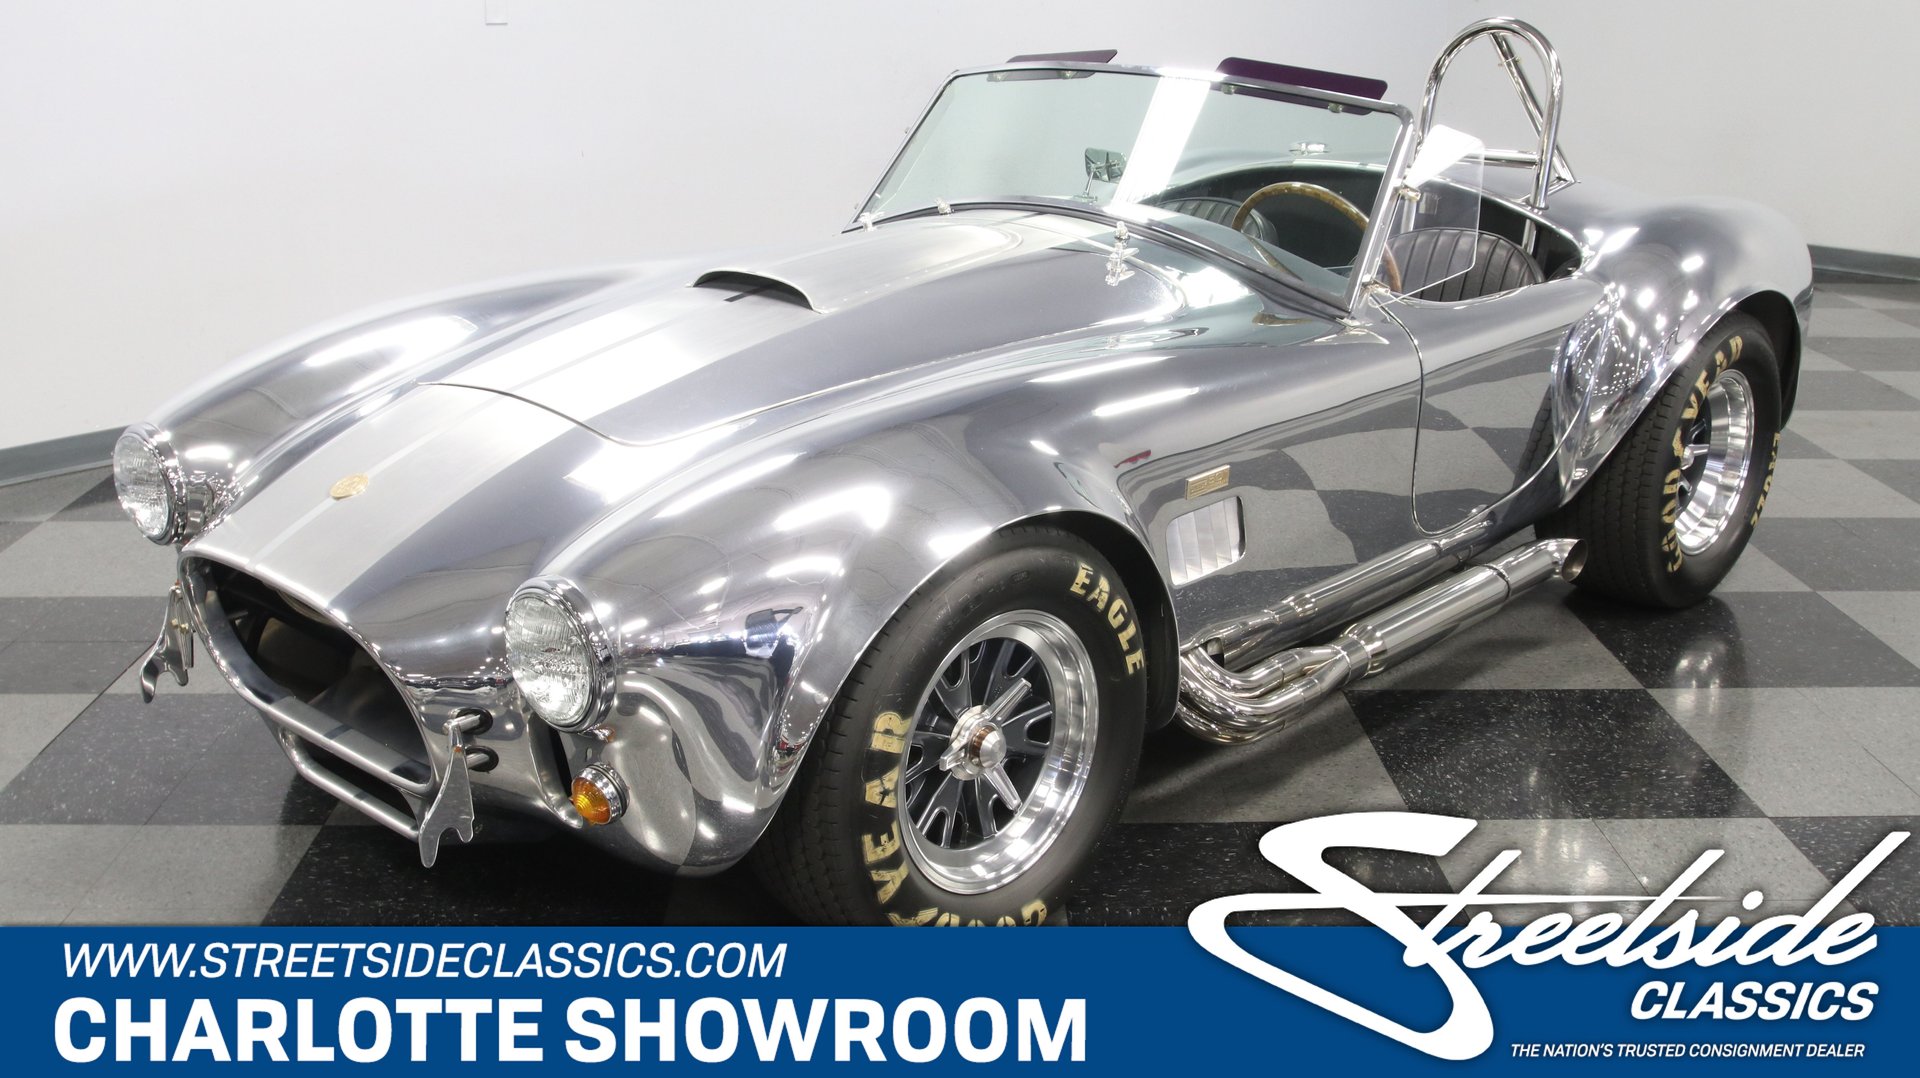 1965 Shelby Cobra Streetside Classics The Nation S Trusted Classic Car Consignment Dealer